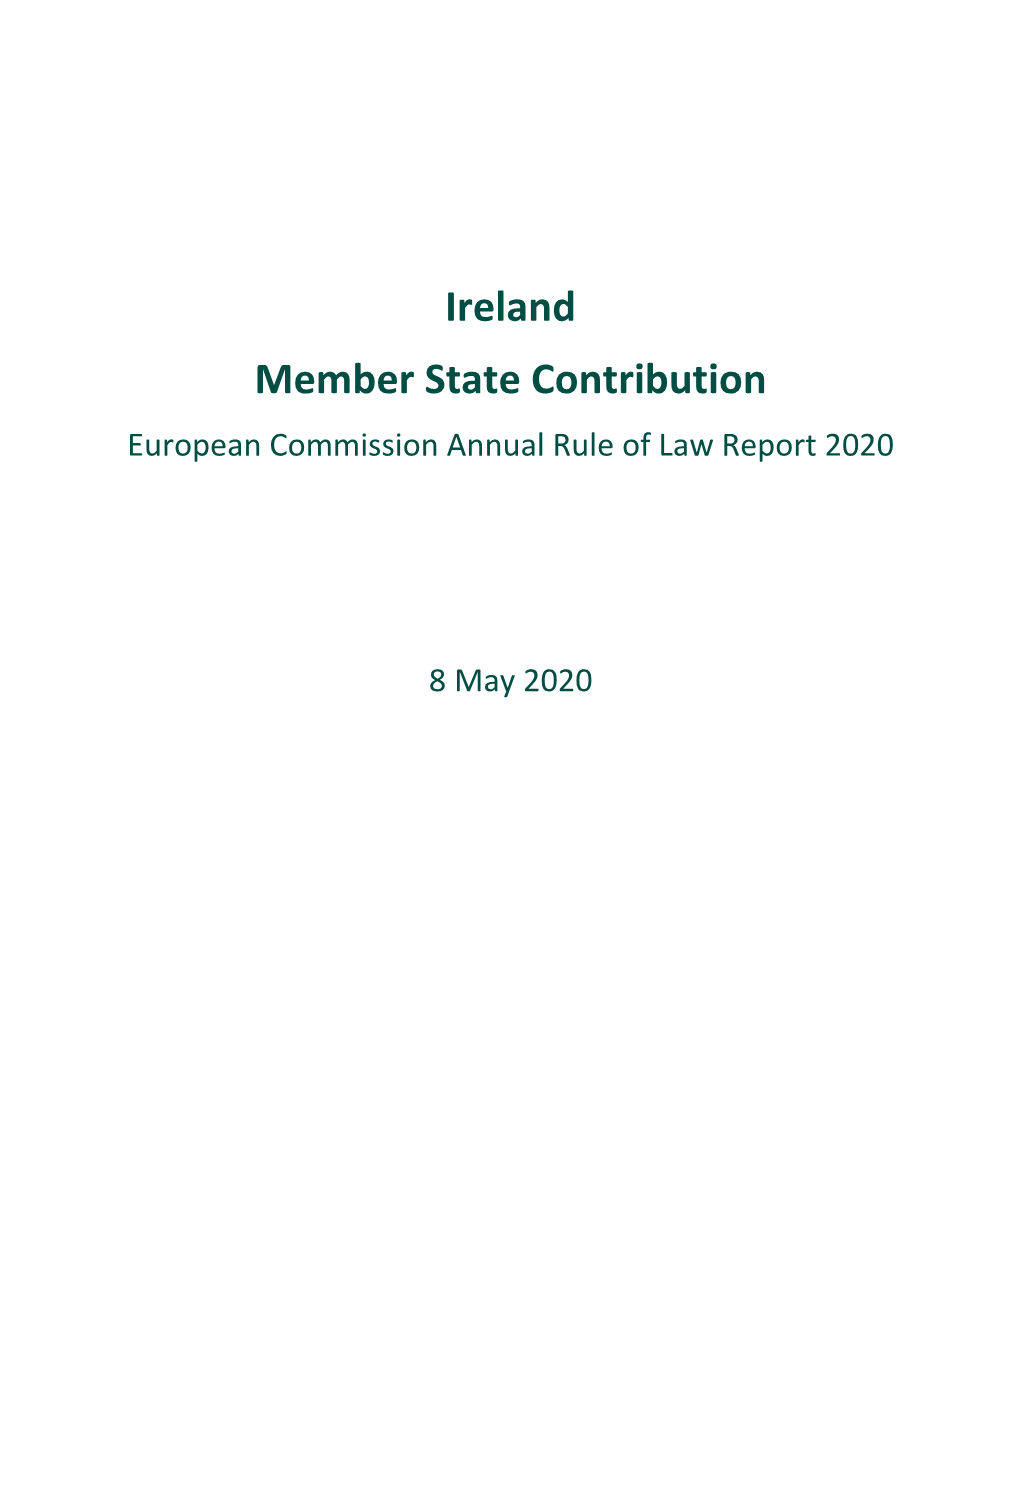 Ireland Member State Contribution European Commission Annual Rule of Law Report 2020